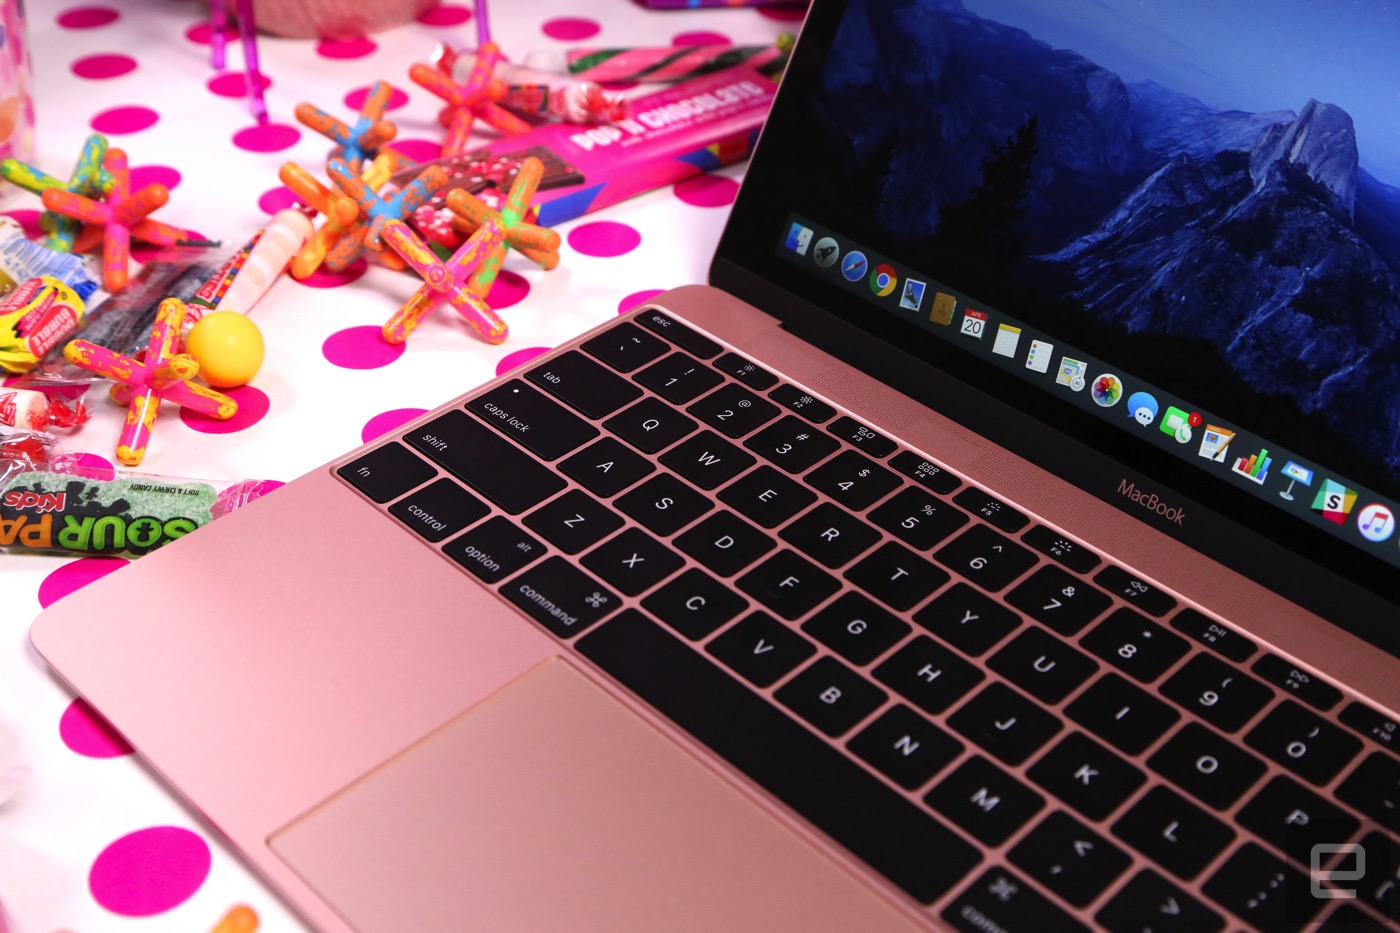 Apple's updated MacBook is indeed faster with longer battery life